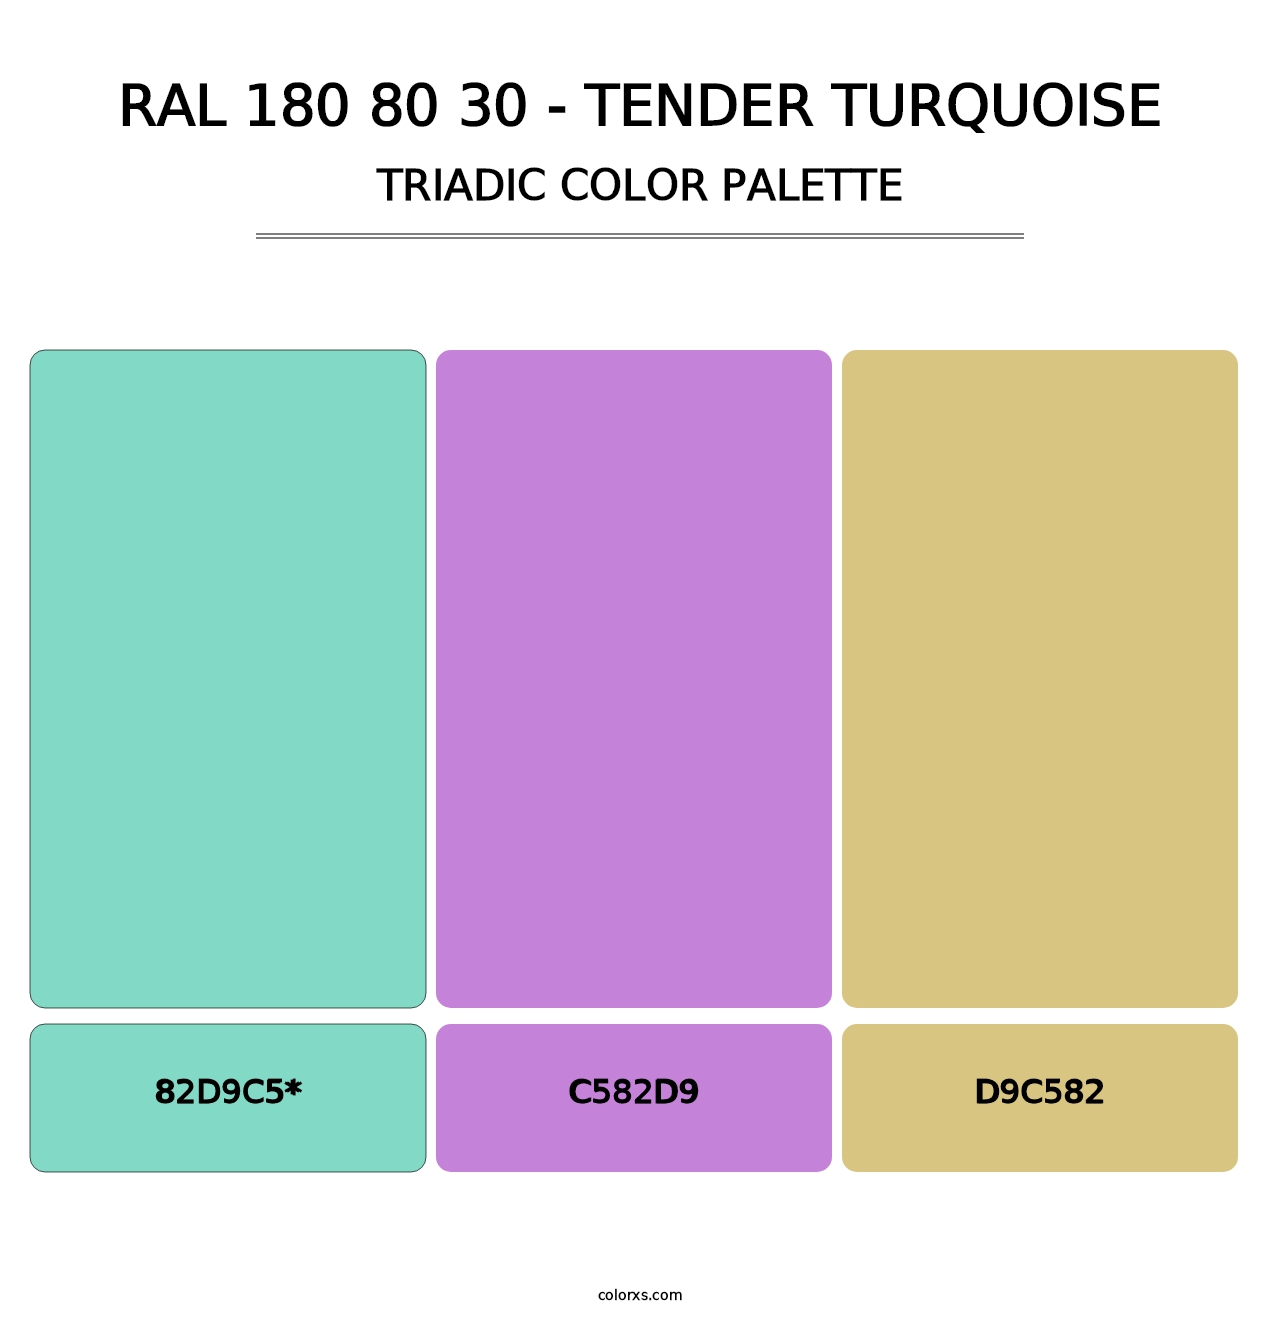 RAL 180 80 30 - Tender Turquoise - Triadic Color Palette